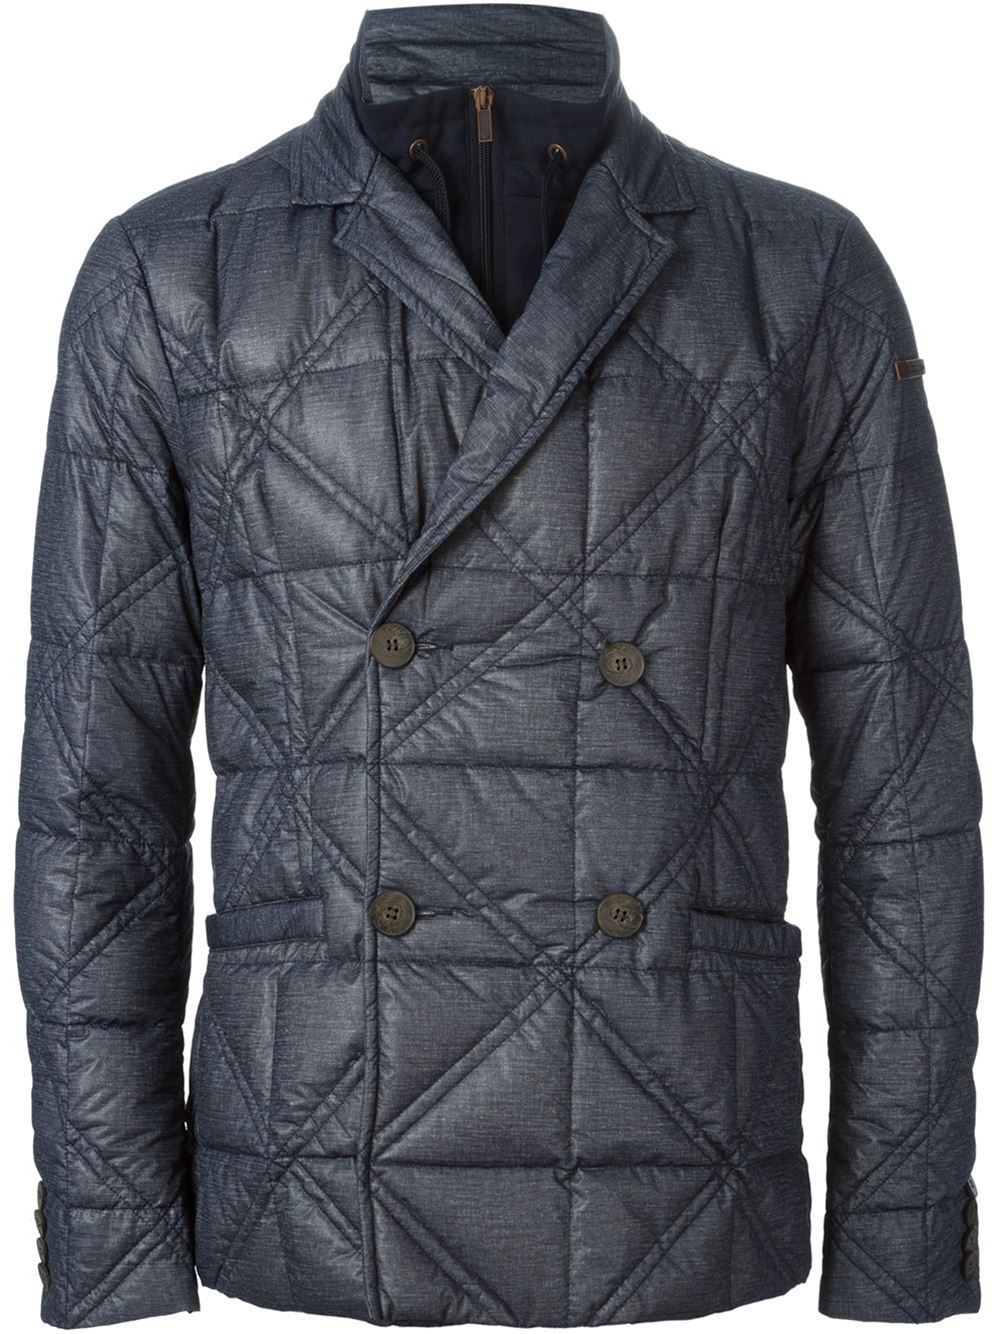 Emporio Armani Double Breasted Quilted Jacket in Blue for Men - Lyst